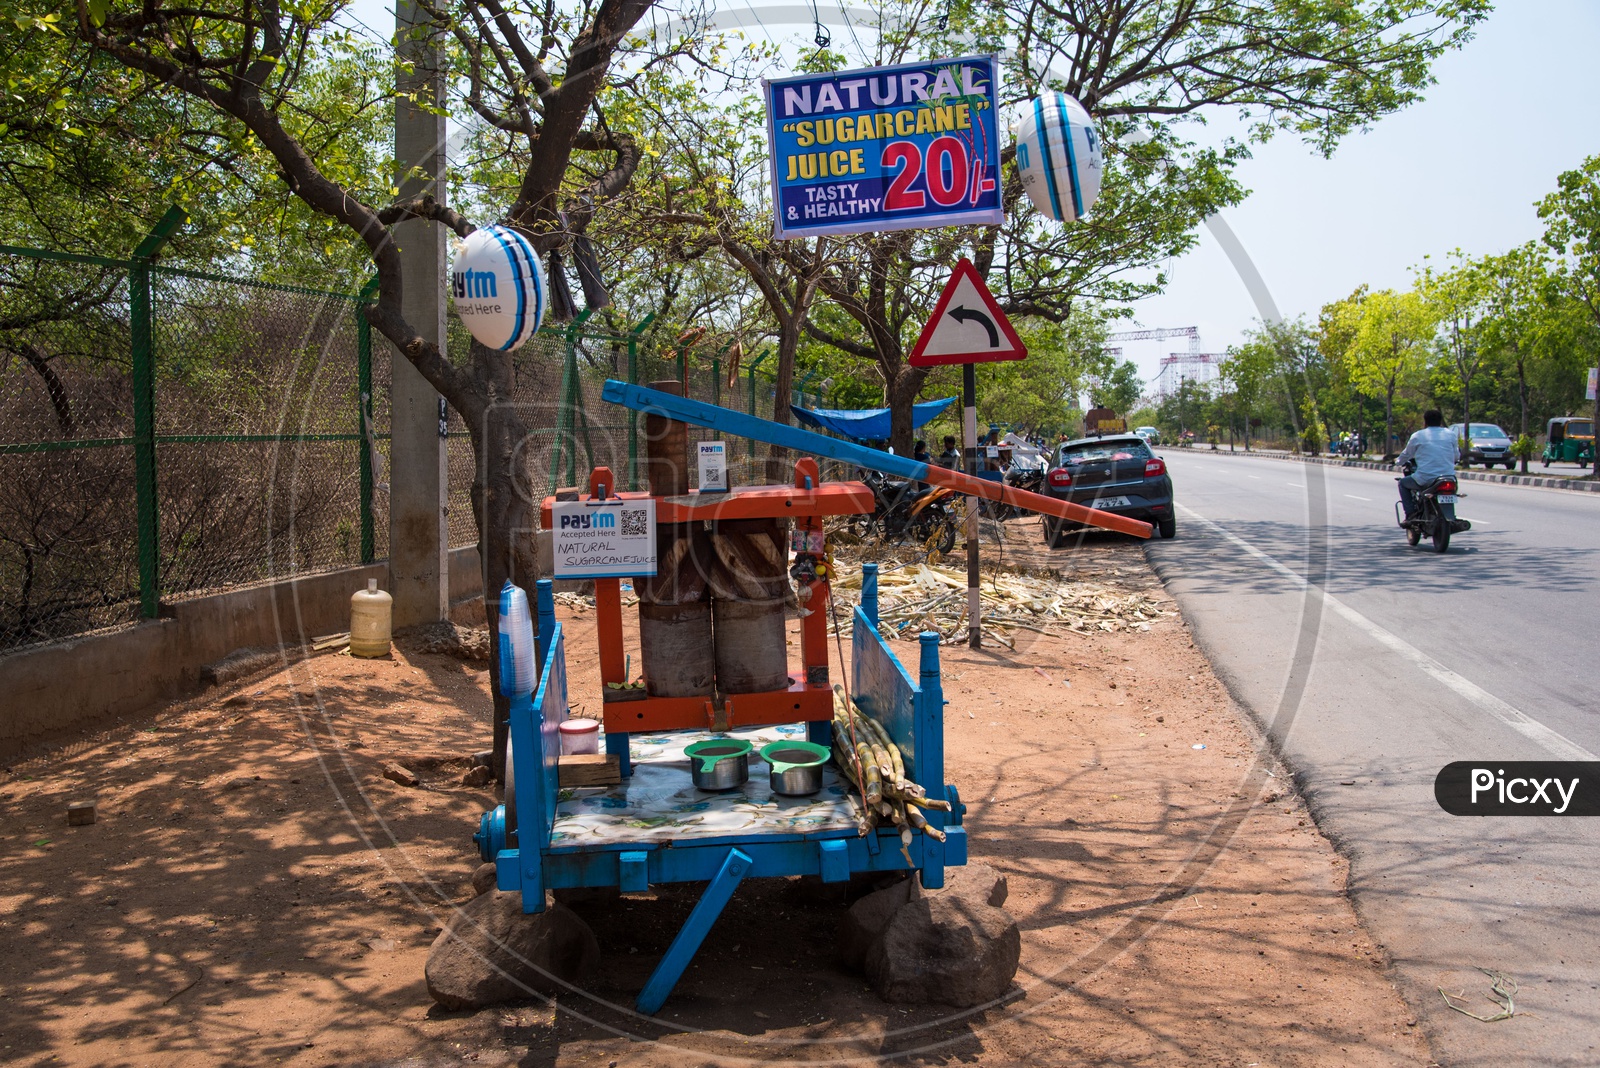 Natural Sugarcane Juice stall accepting payment vide Paytm